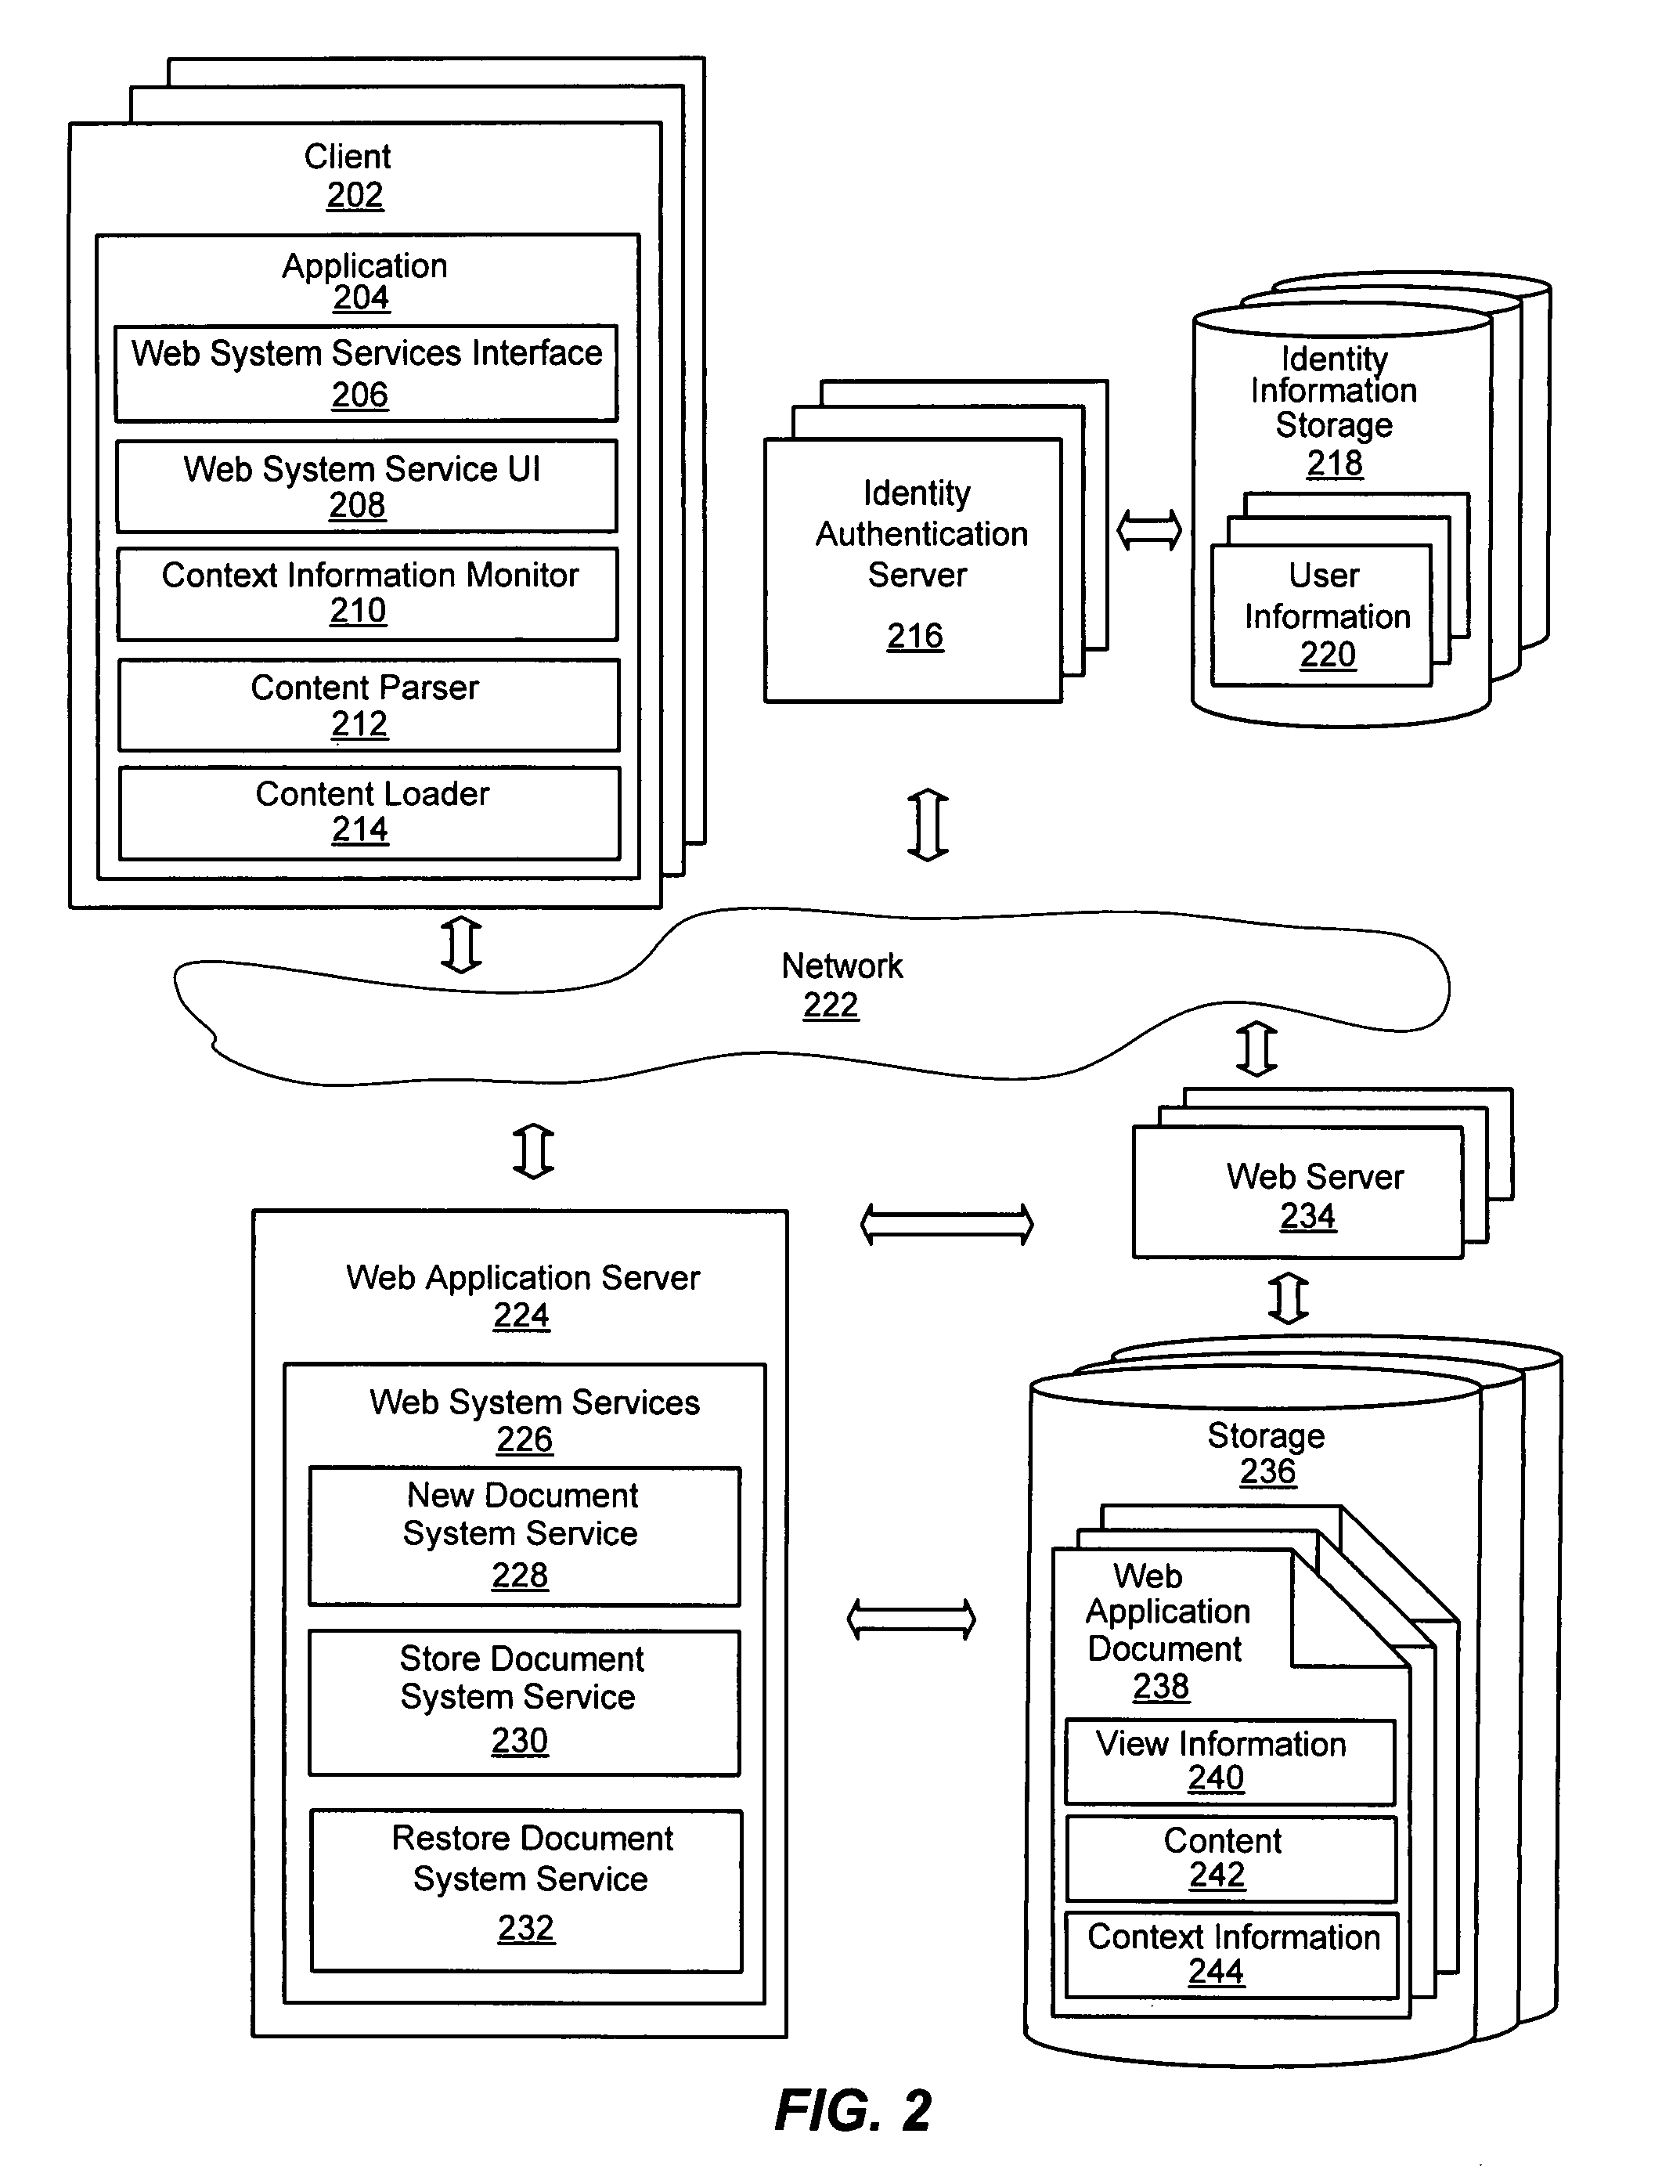 System and method of providing a user interface for client applications to store data and context information on the web